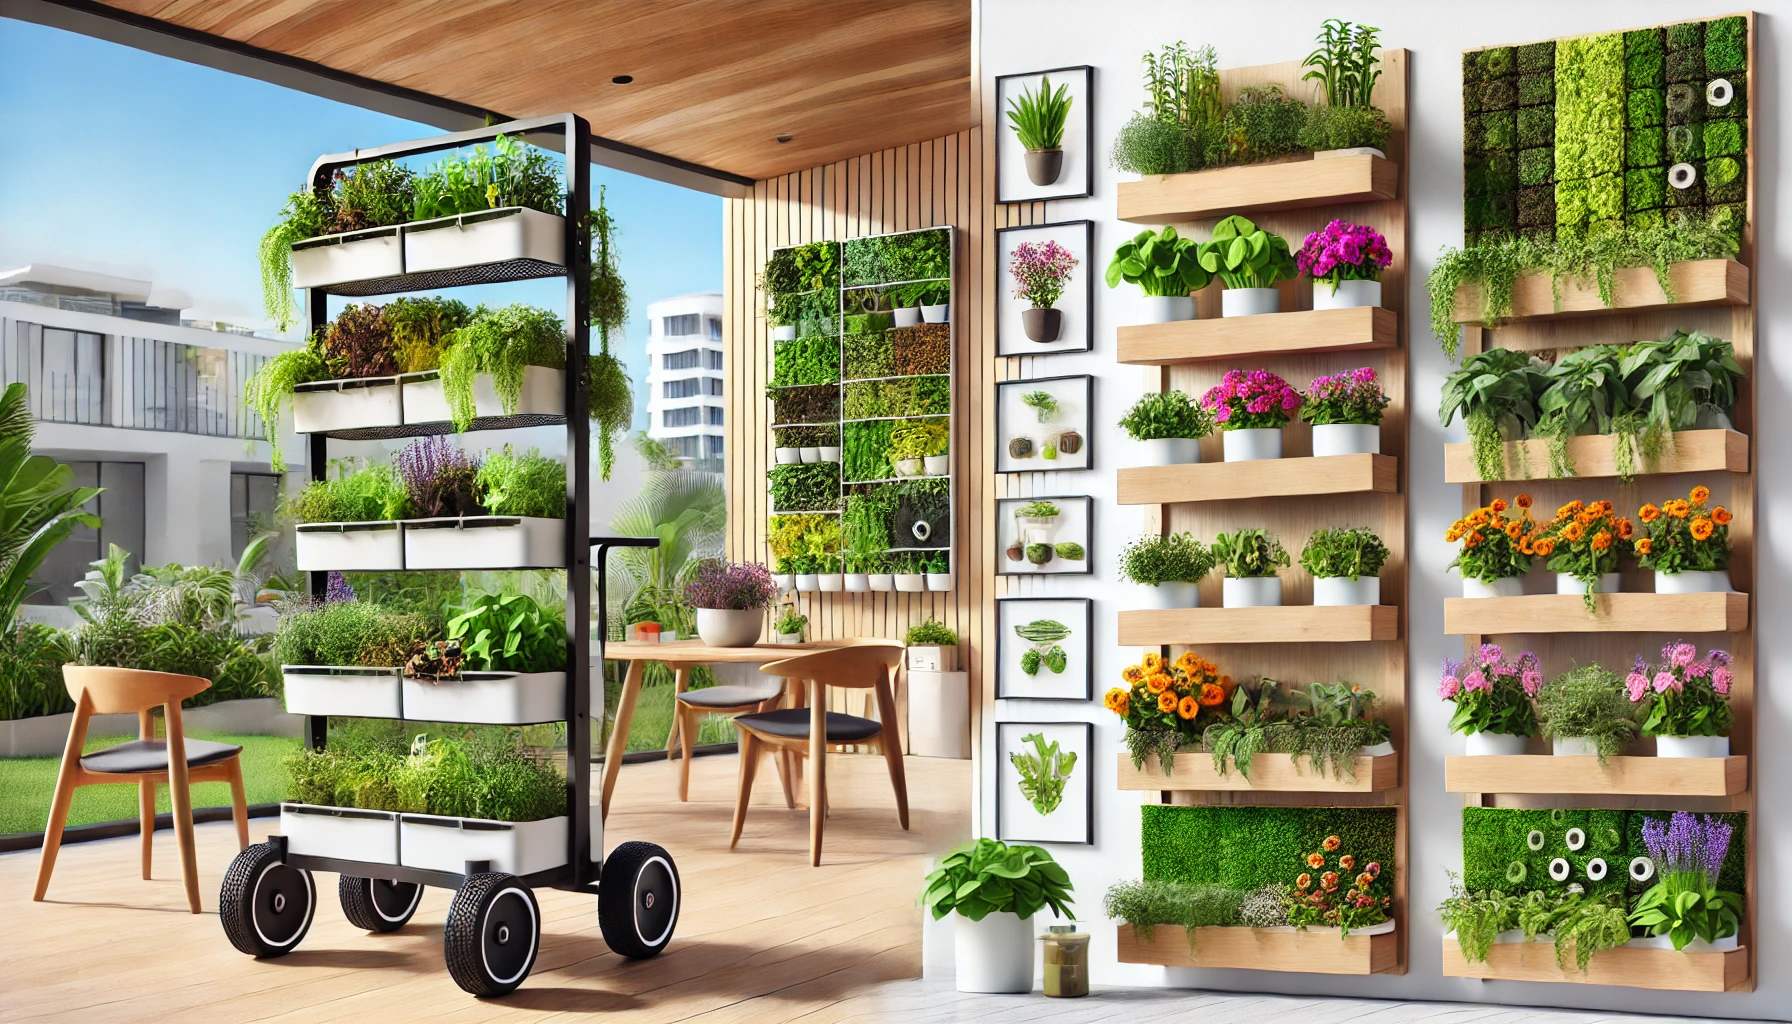 A collection of vertical gardens featuring both mobile and wall-mounted systems